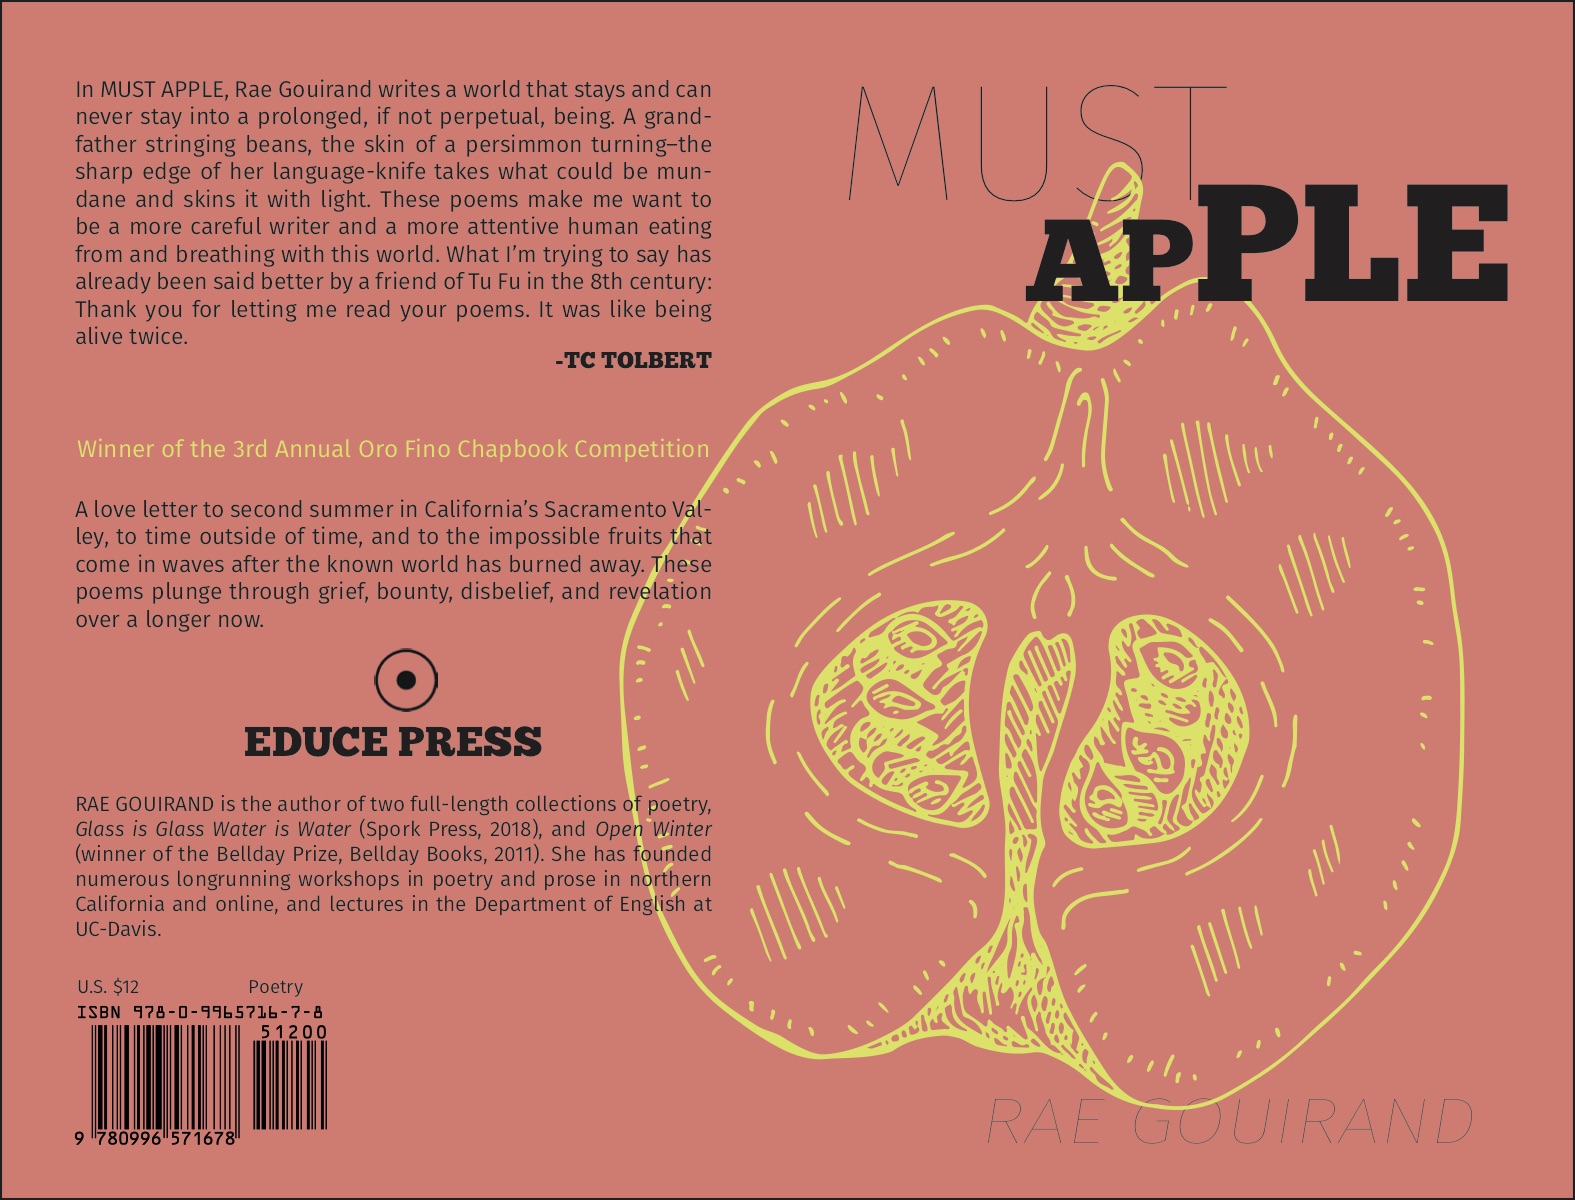 The cover of  Rae Gouirand's poetry collection "Must Apple."